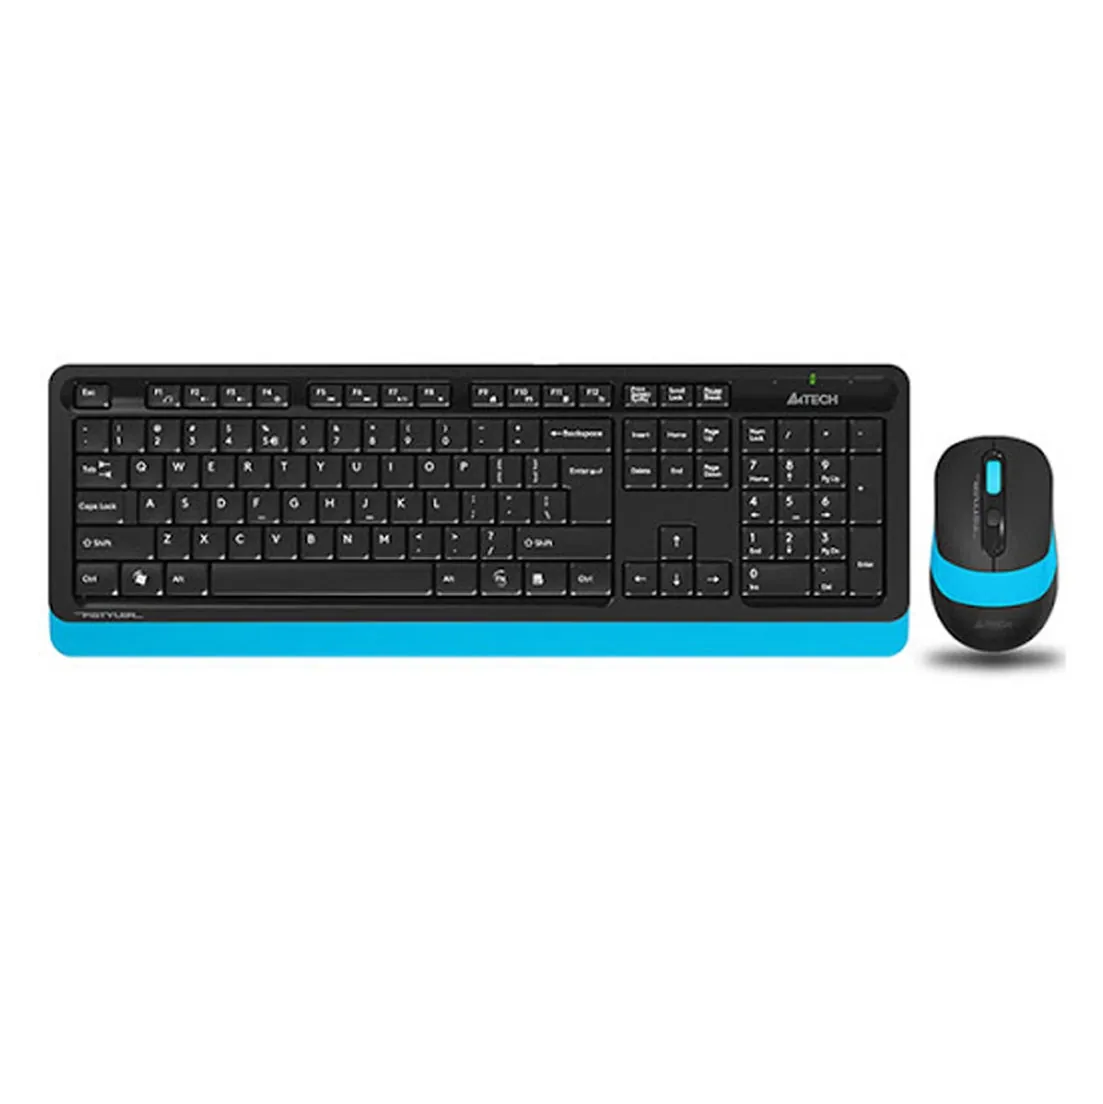 A4TECH FG1010 Wireless Keyboard Mouse Combo With Bangla – Blue Color